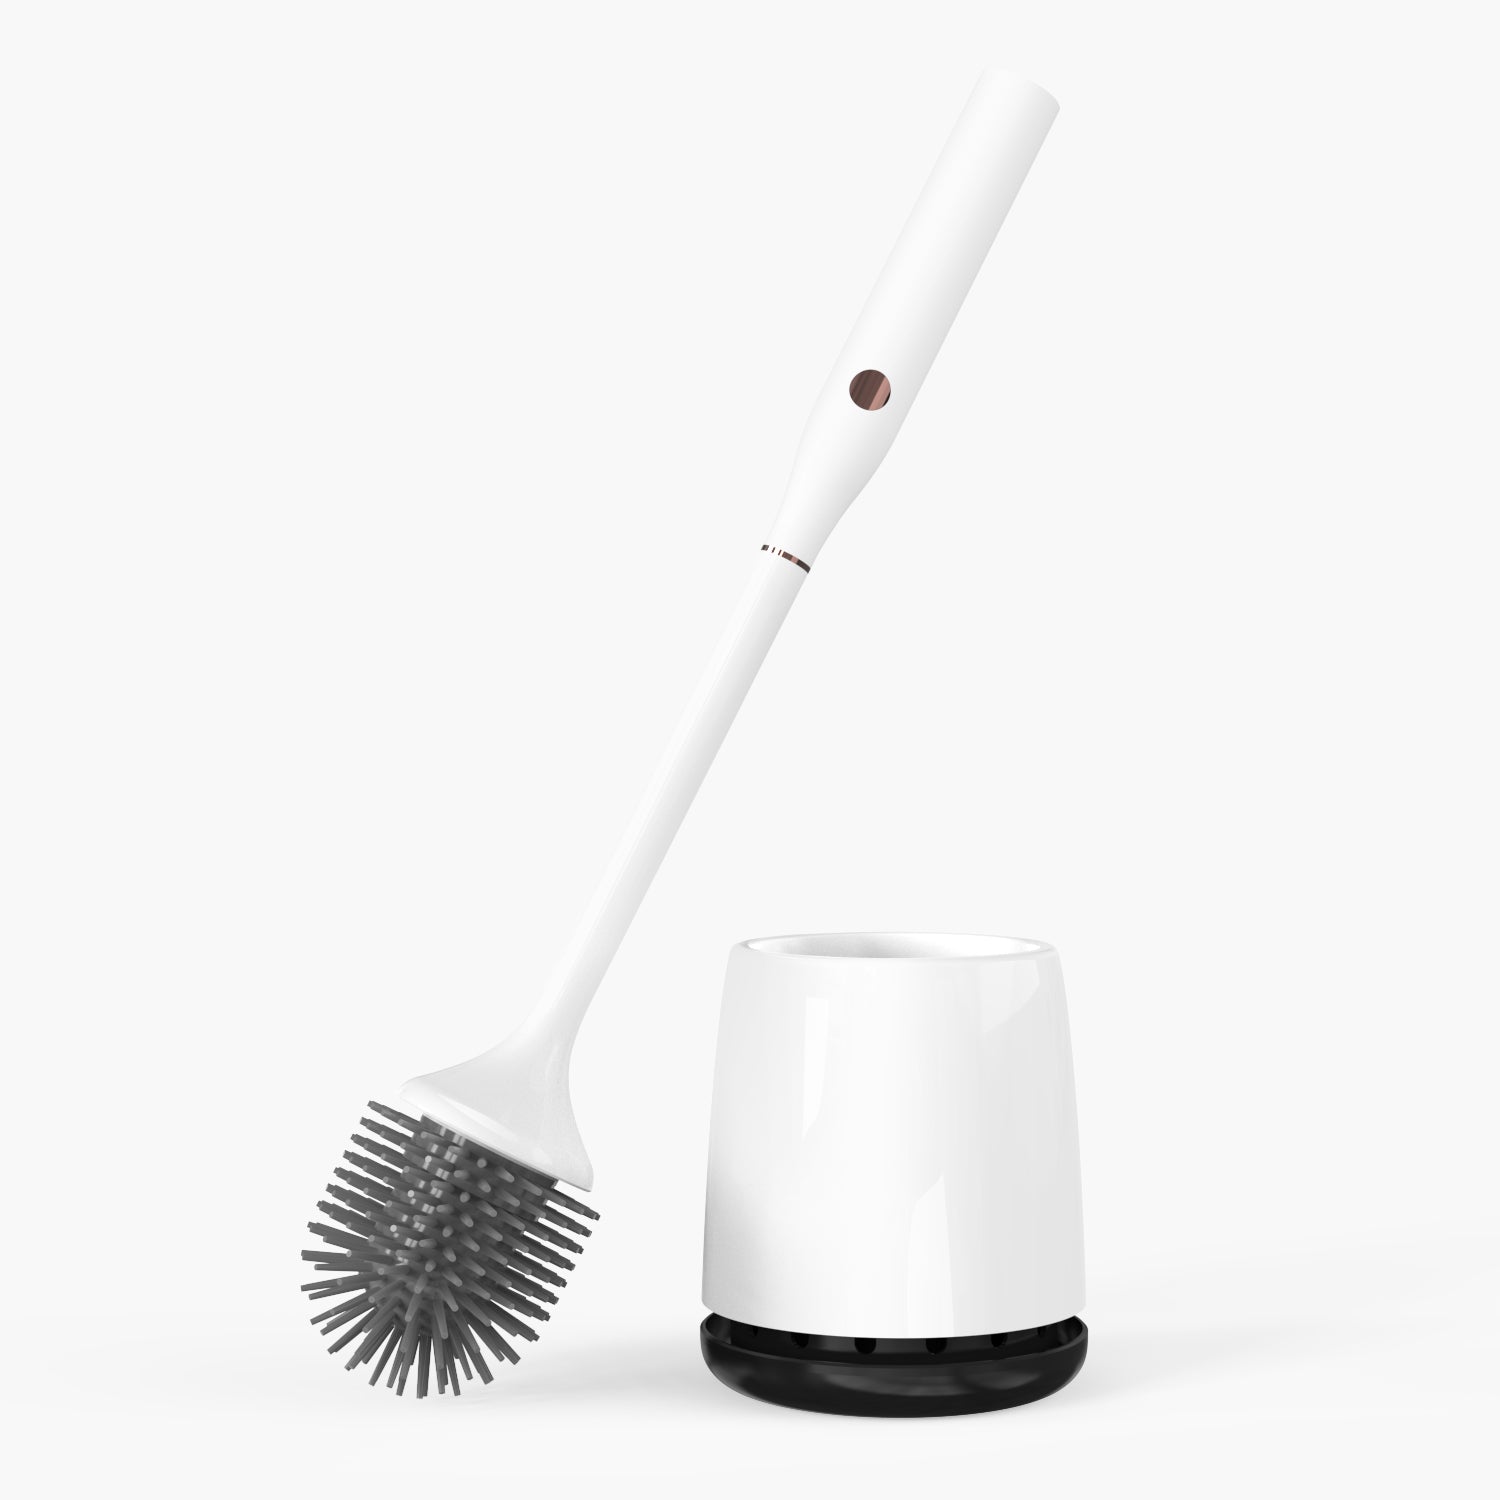 How to clean a toilet brush: 42p 'holy grail' product to remove buildup  'fast